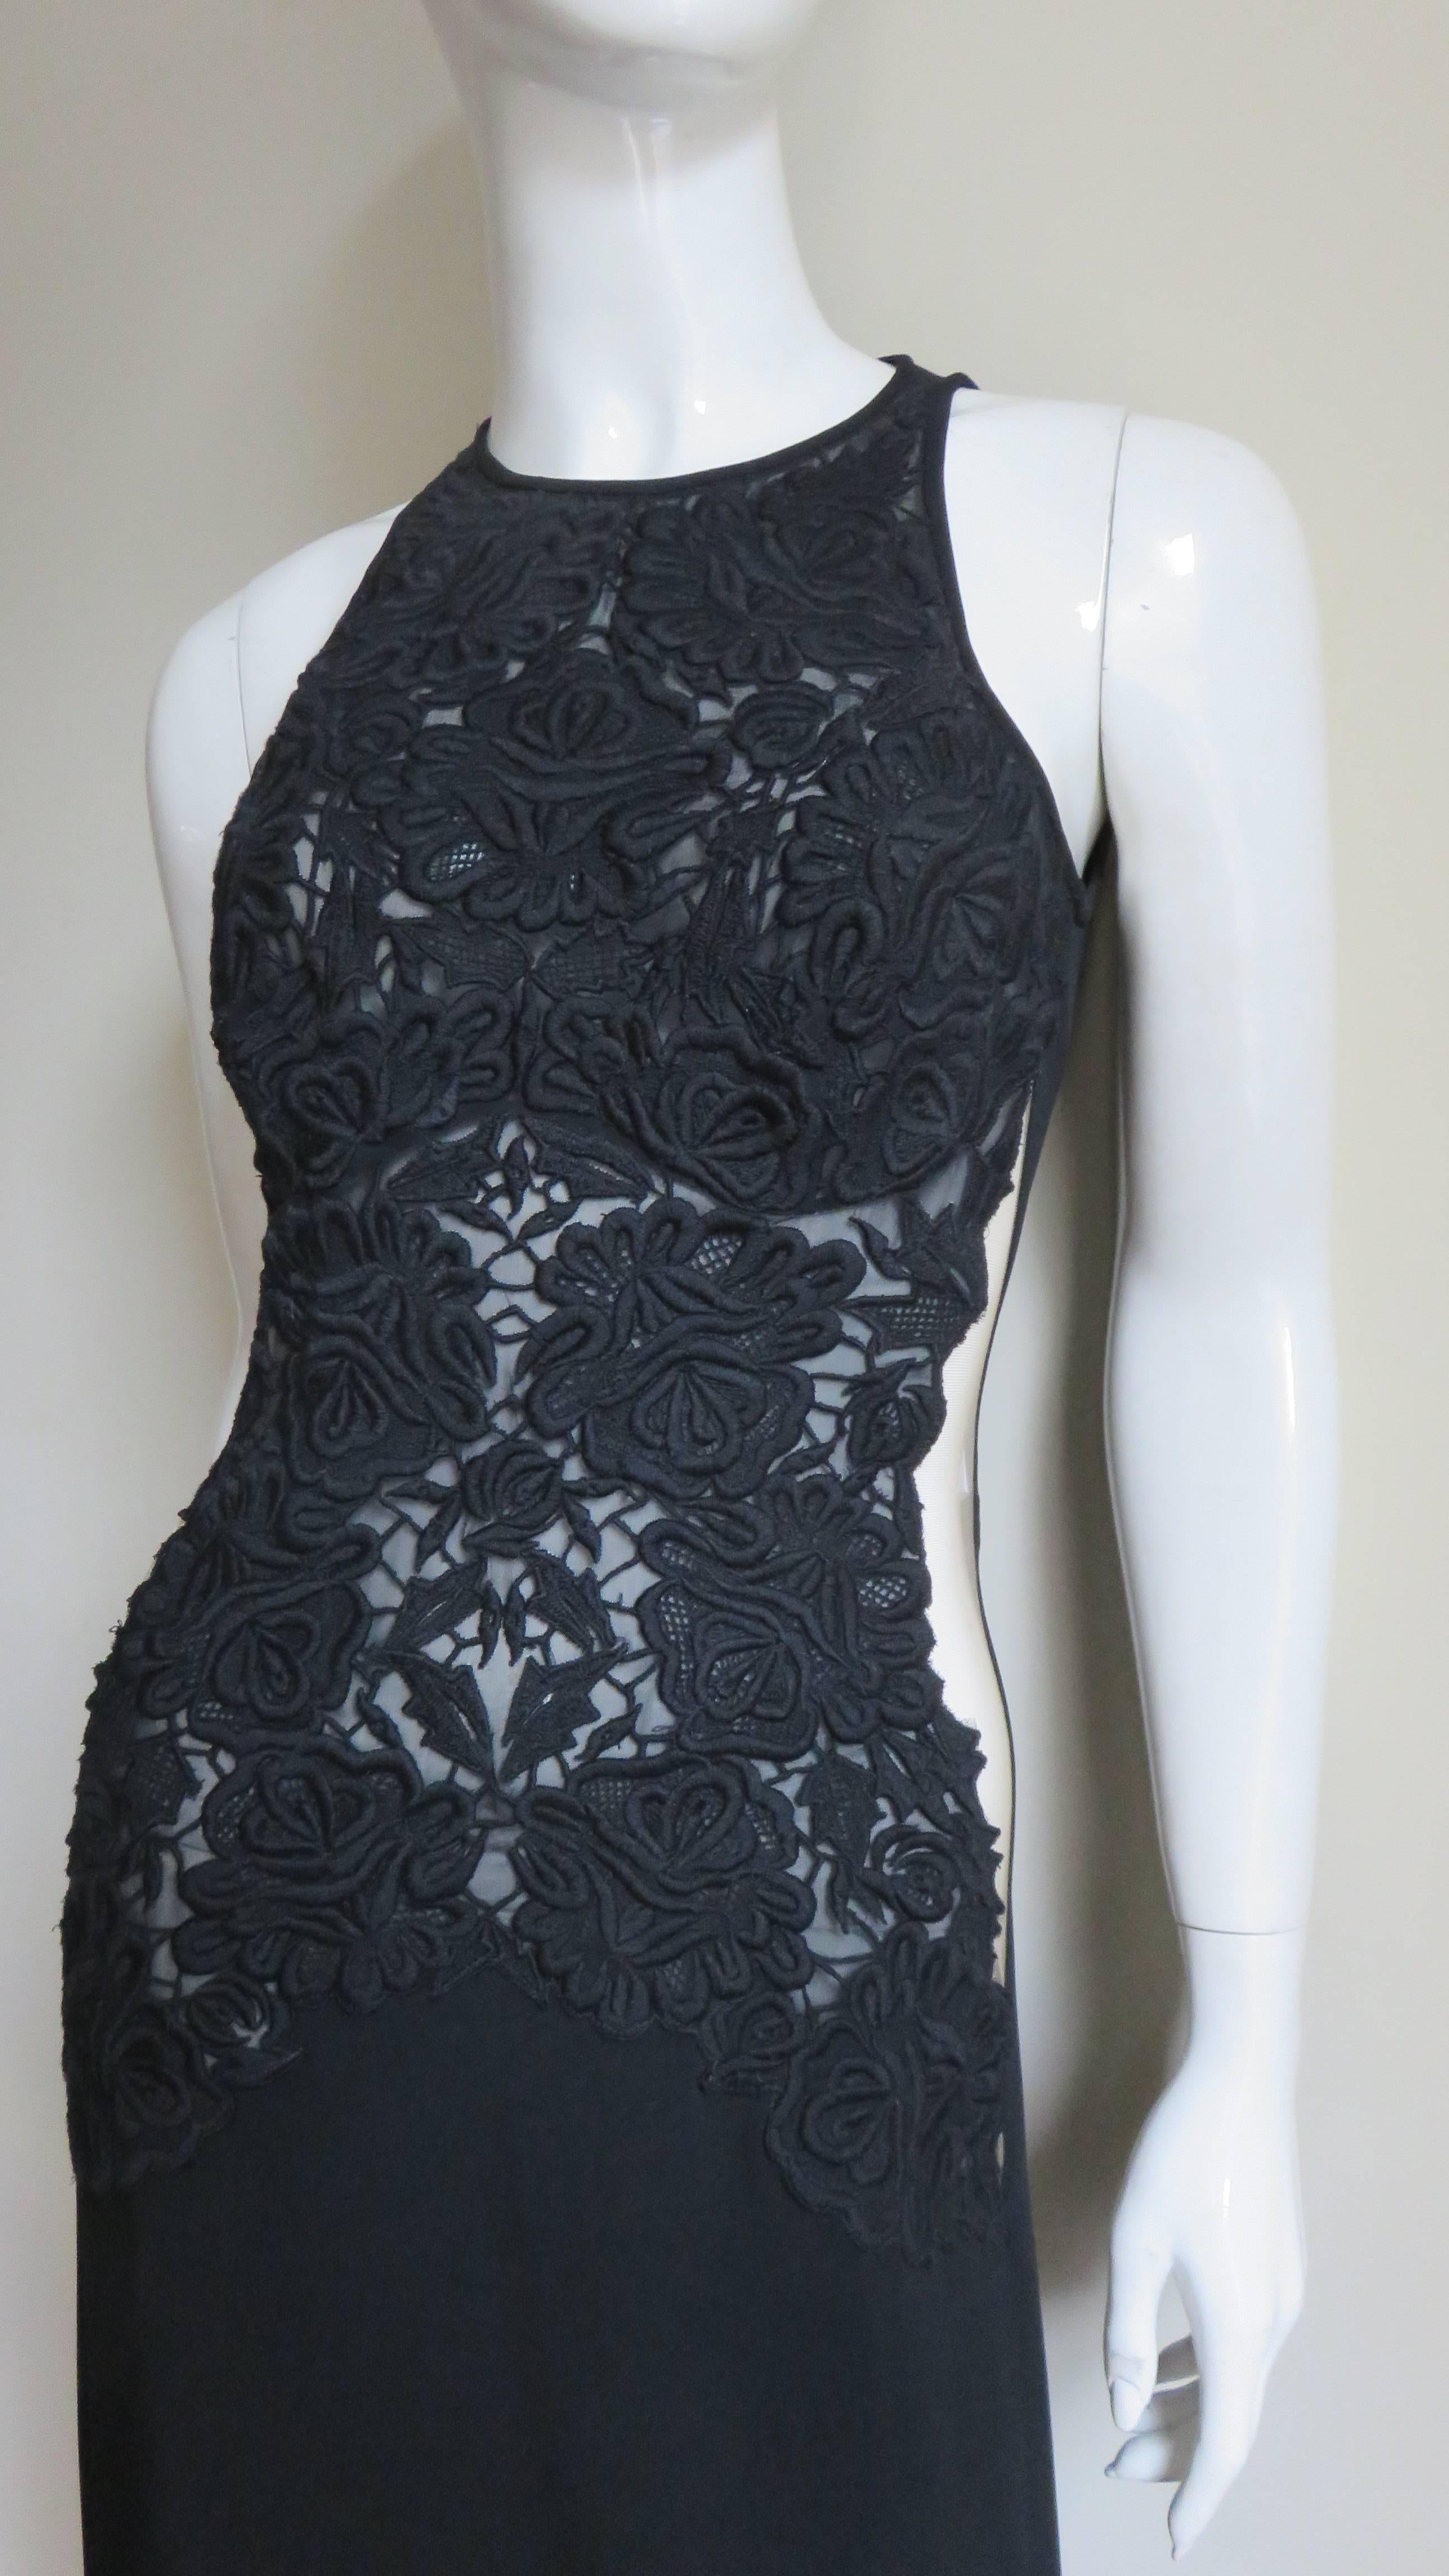 Stella McCartney Gown with Cut out Waist In Good Condition For Sale In Water Mill, NY